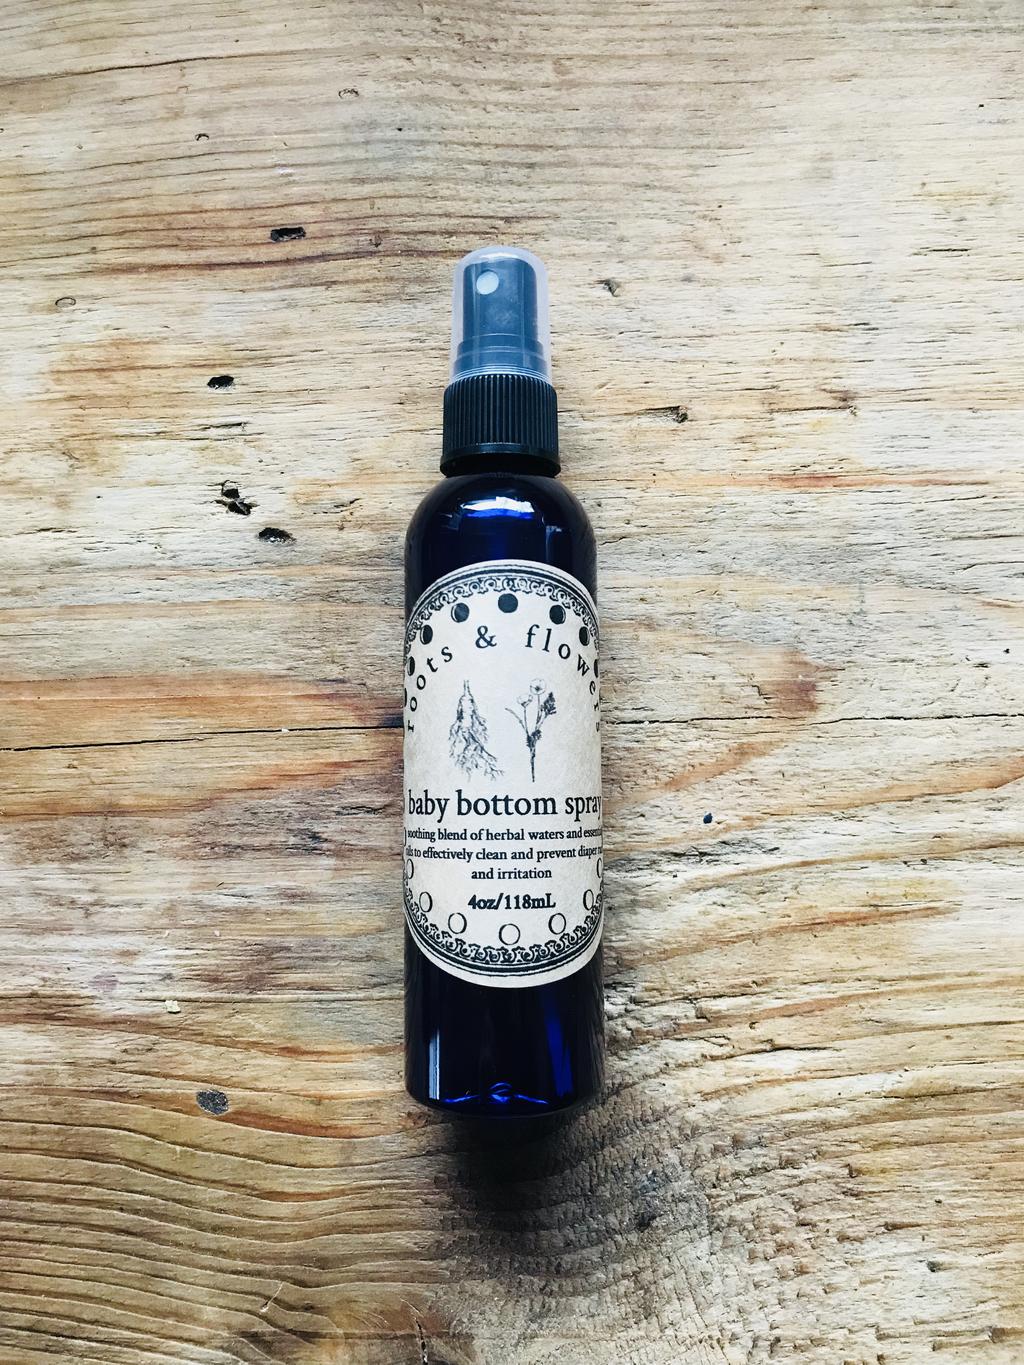 Baby Bottom Spray (4oz) #B10 Price: $6 RRP $12 Baby Bottom Spray is a super soothing and cleansing blend of herbal waters and essential oils.